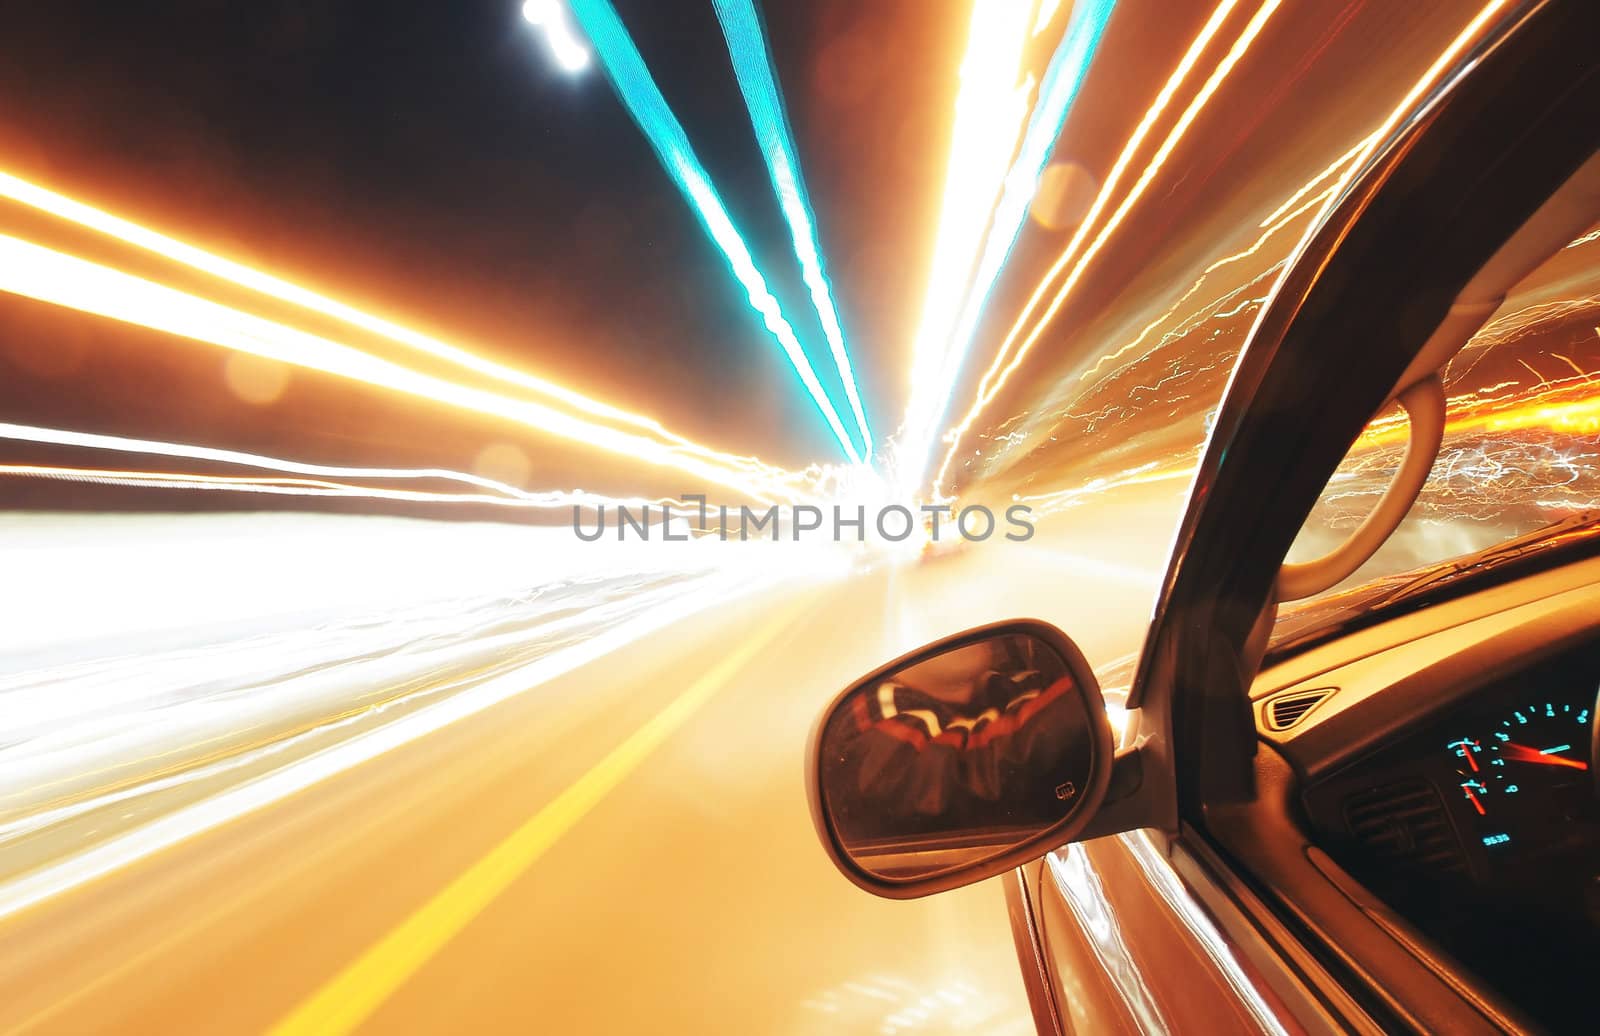 View from a moving vehicle gives feeling of a speed of light as timetravel by digidreamgrafix